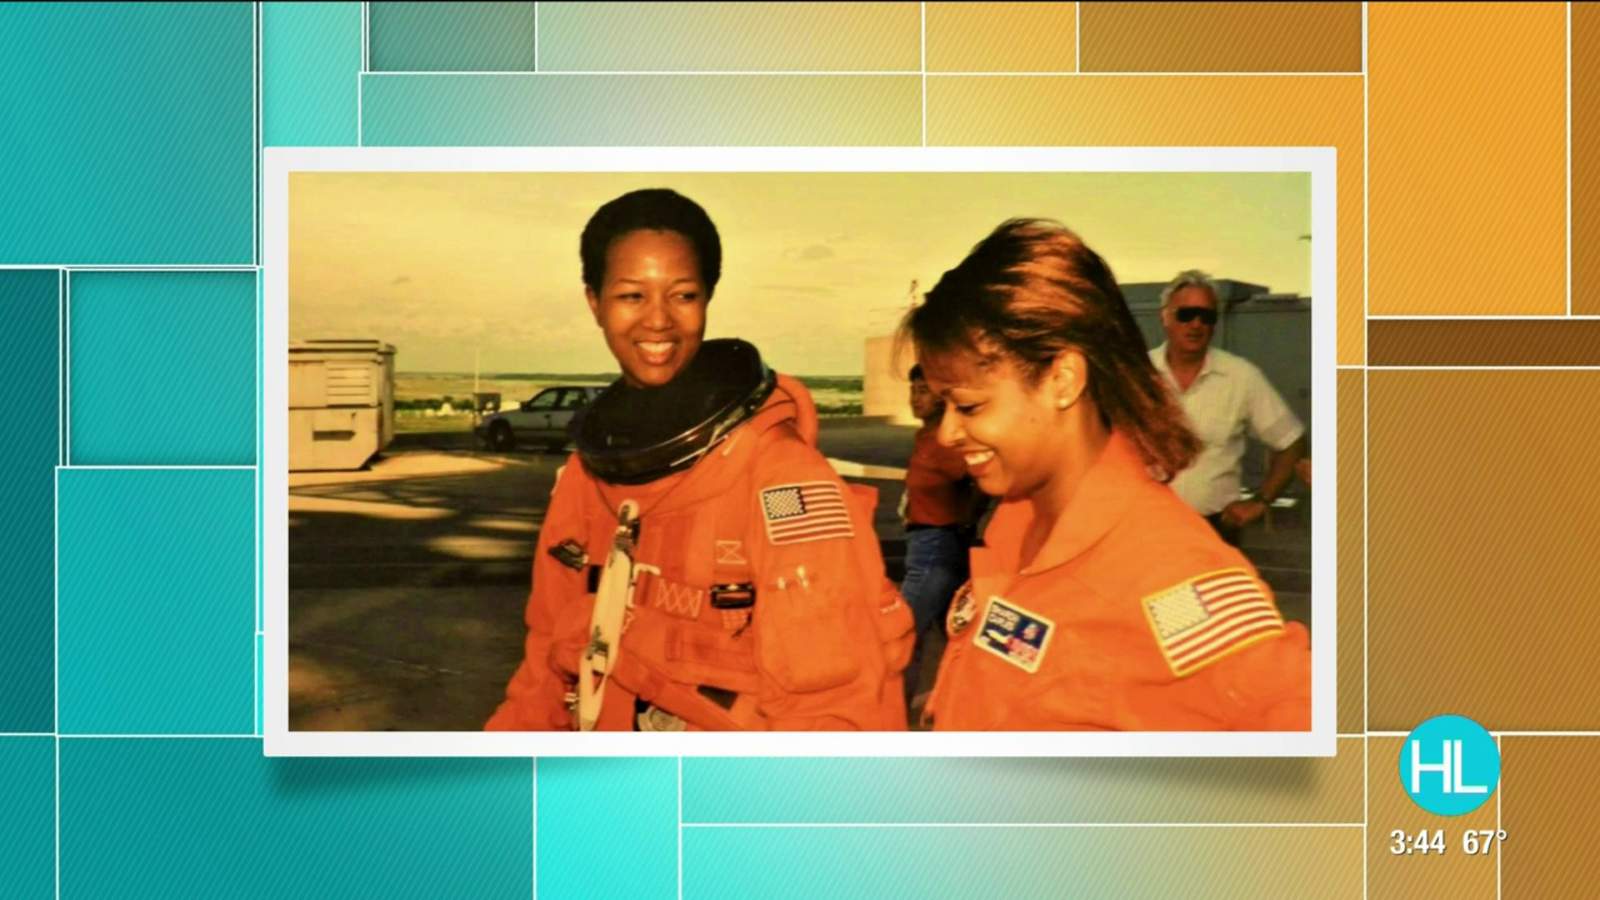 Black History Month: Sharon McDougle ‘suited up’ the first black woman to travel into space